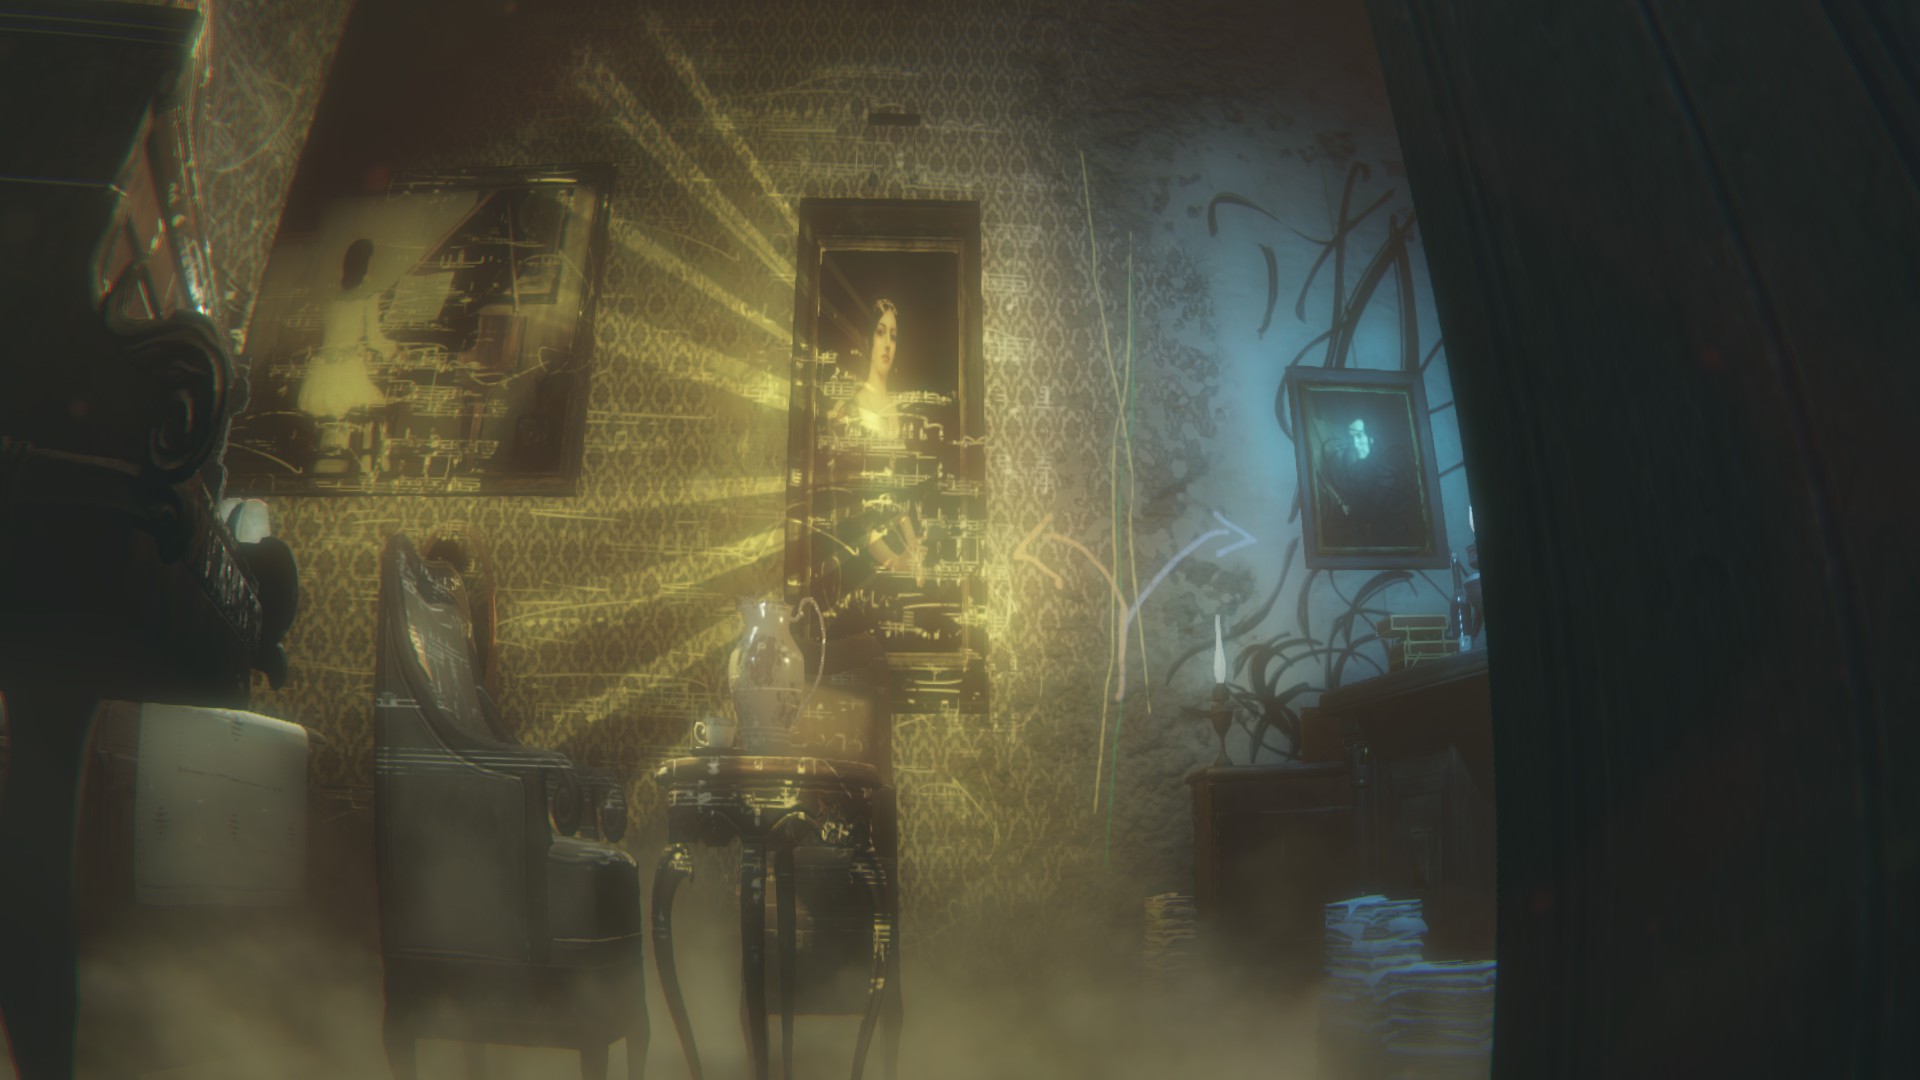 Check out these screenshots from the DLC to Layers of Fear - Hey